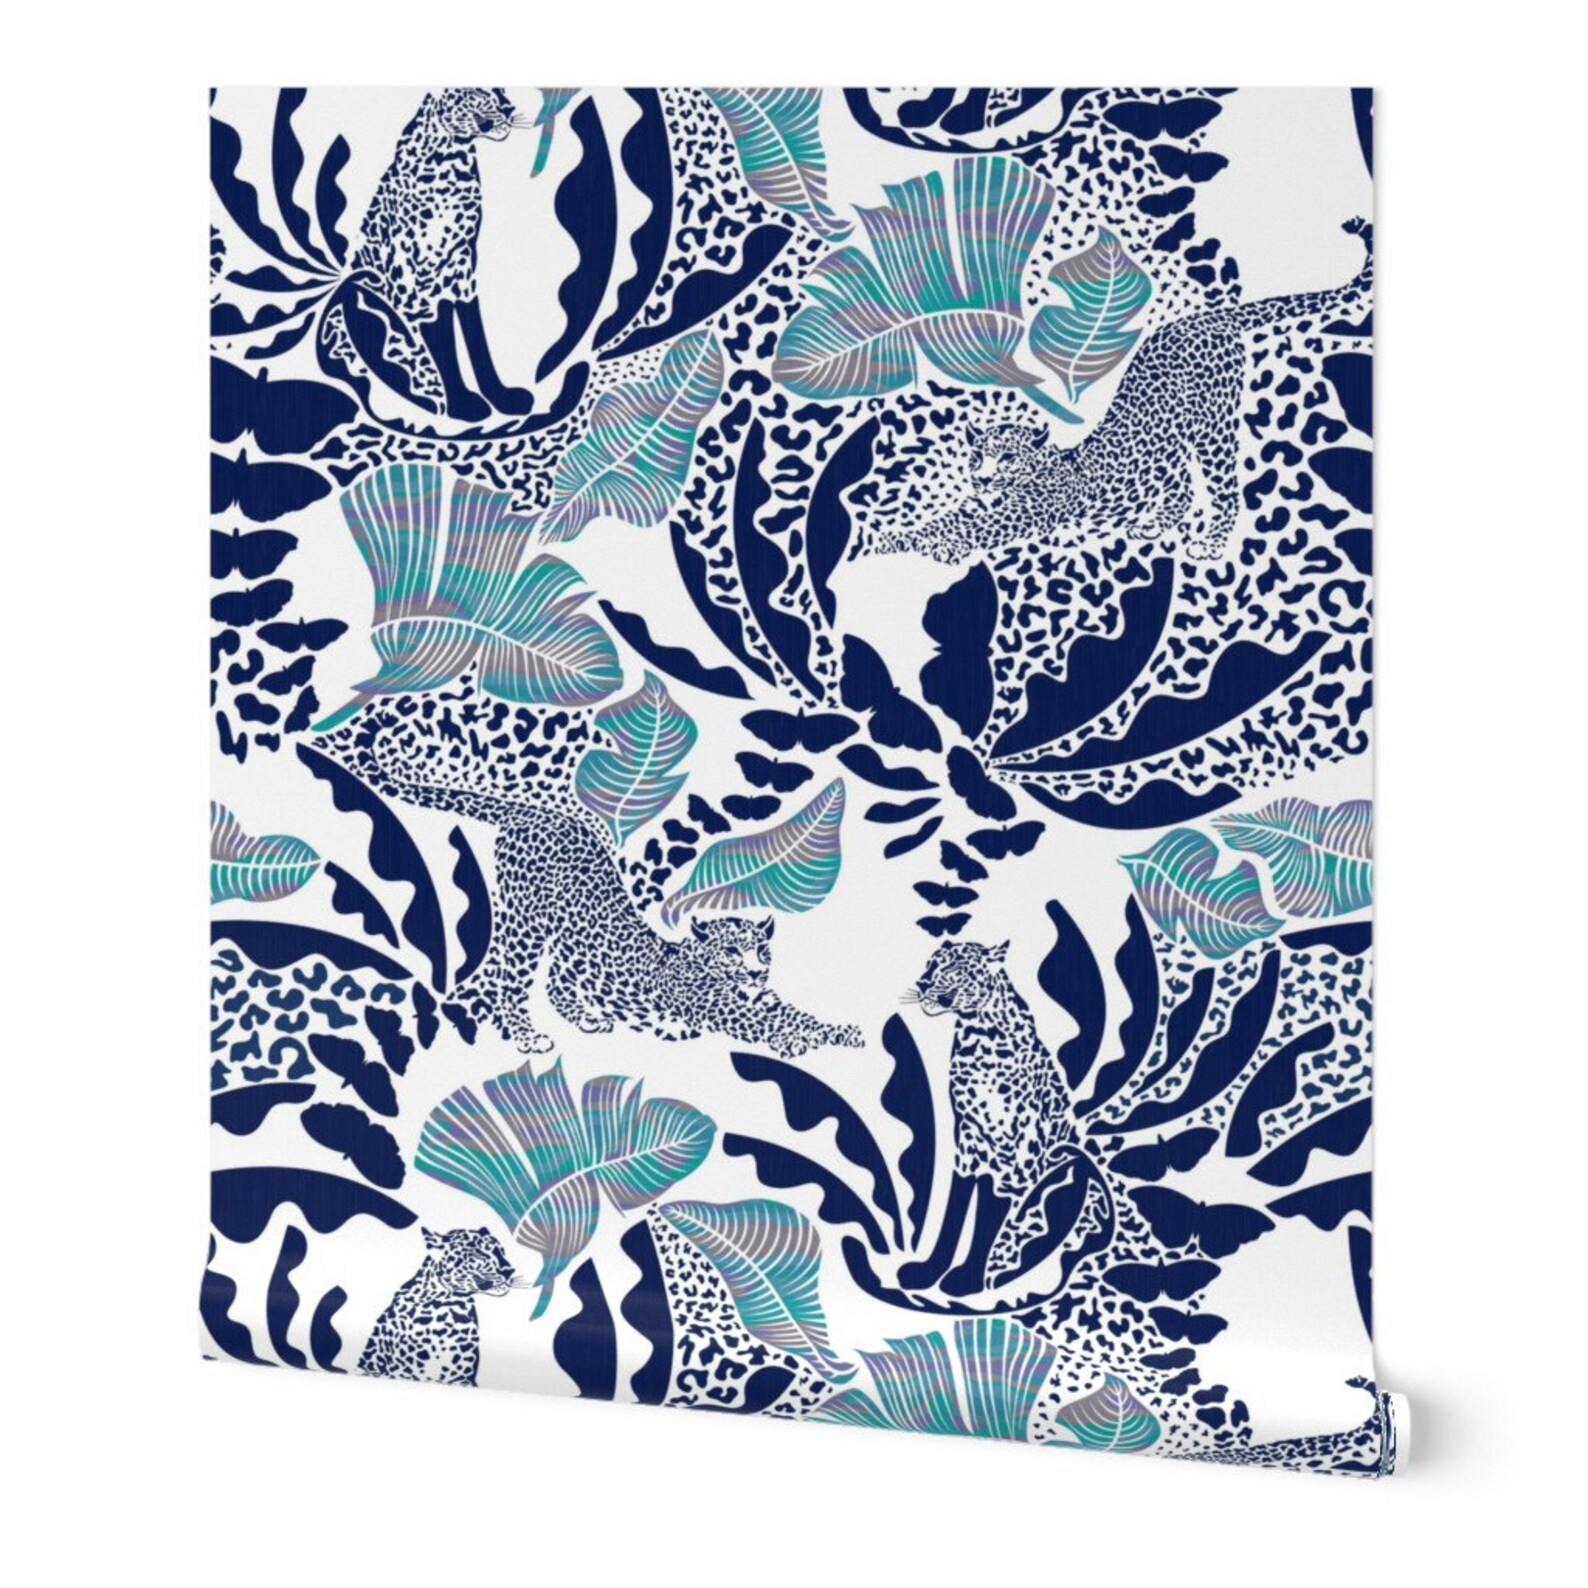 Blue Leopards Wallpaper Magical Jungle by Evamatise - Etsy